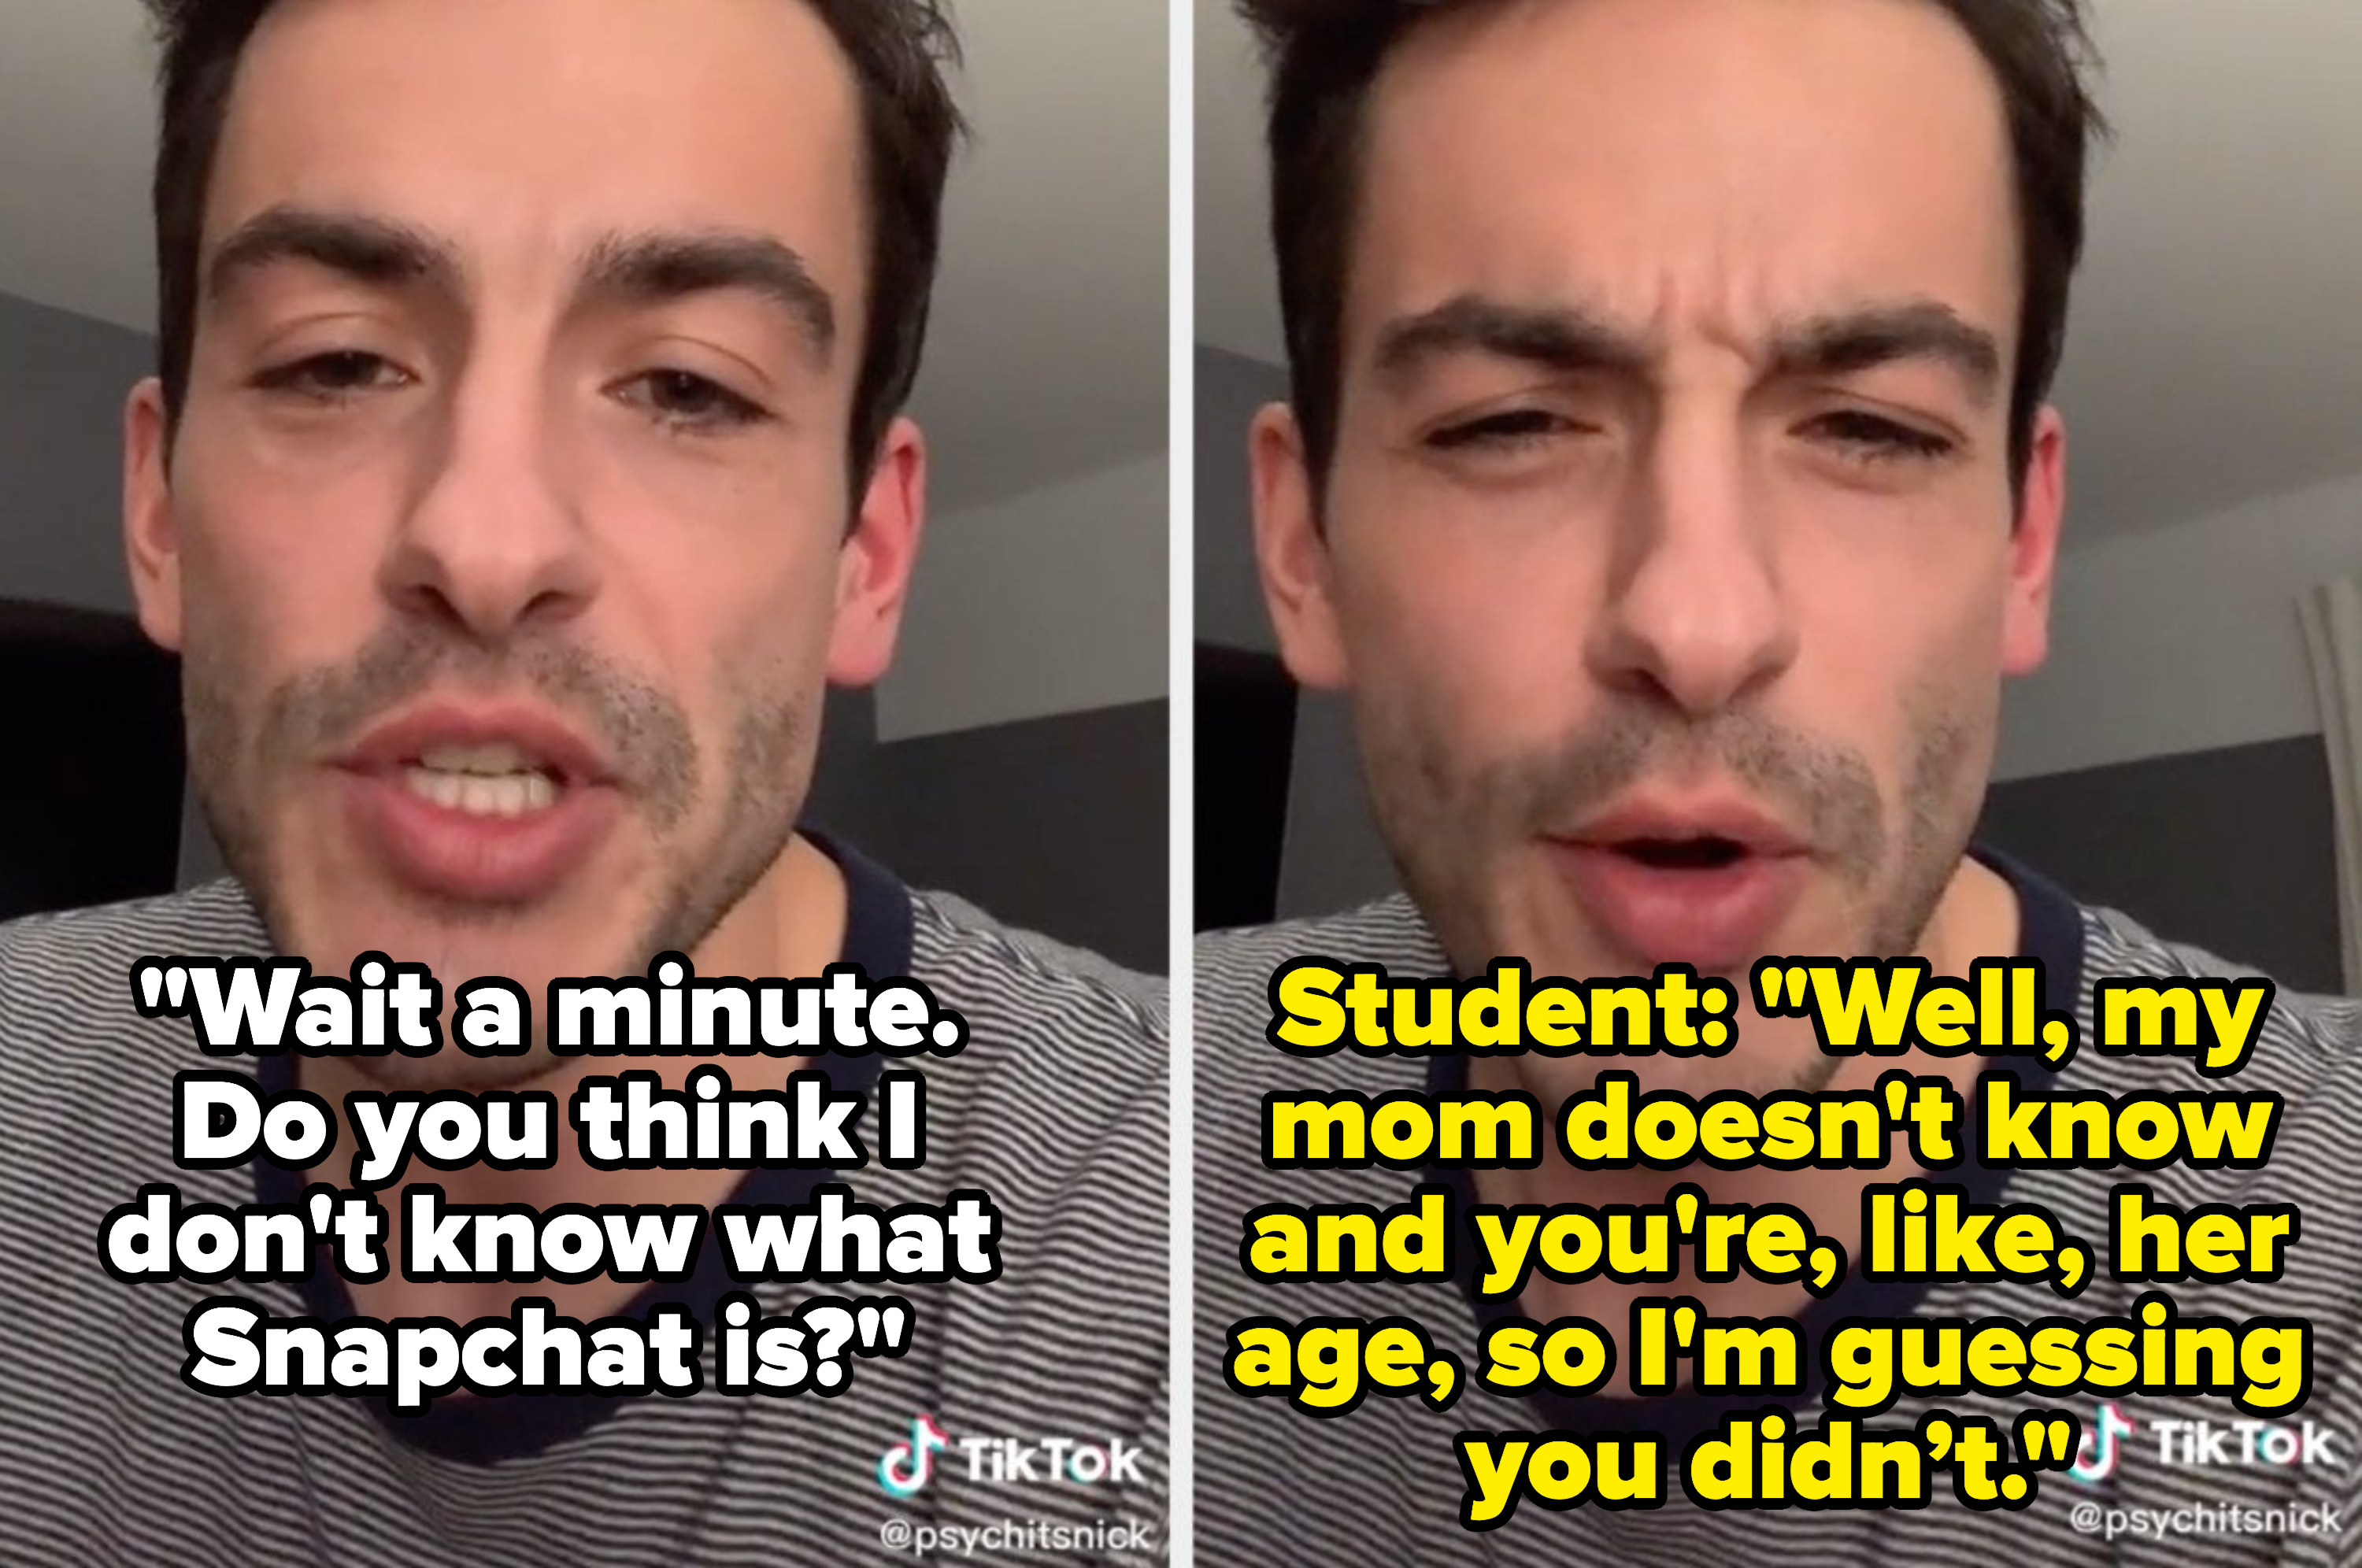 A school psychologist asks: &quot;Do you think I don&#x27;t know what Snapchat is?&quot; and the student replies: &quot;Well, my mom doesn’t know and you’re, like, her age, so I’m guessing you didn’t&quot;